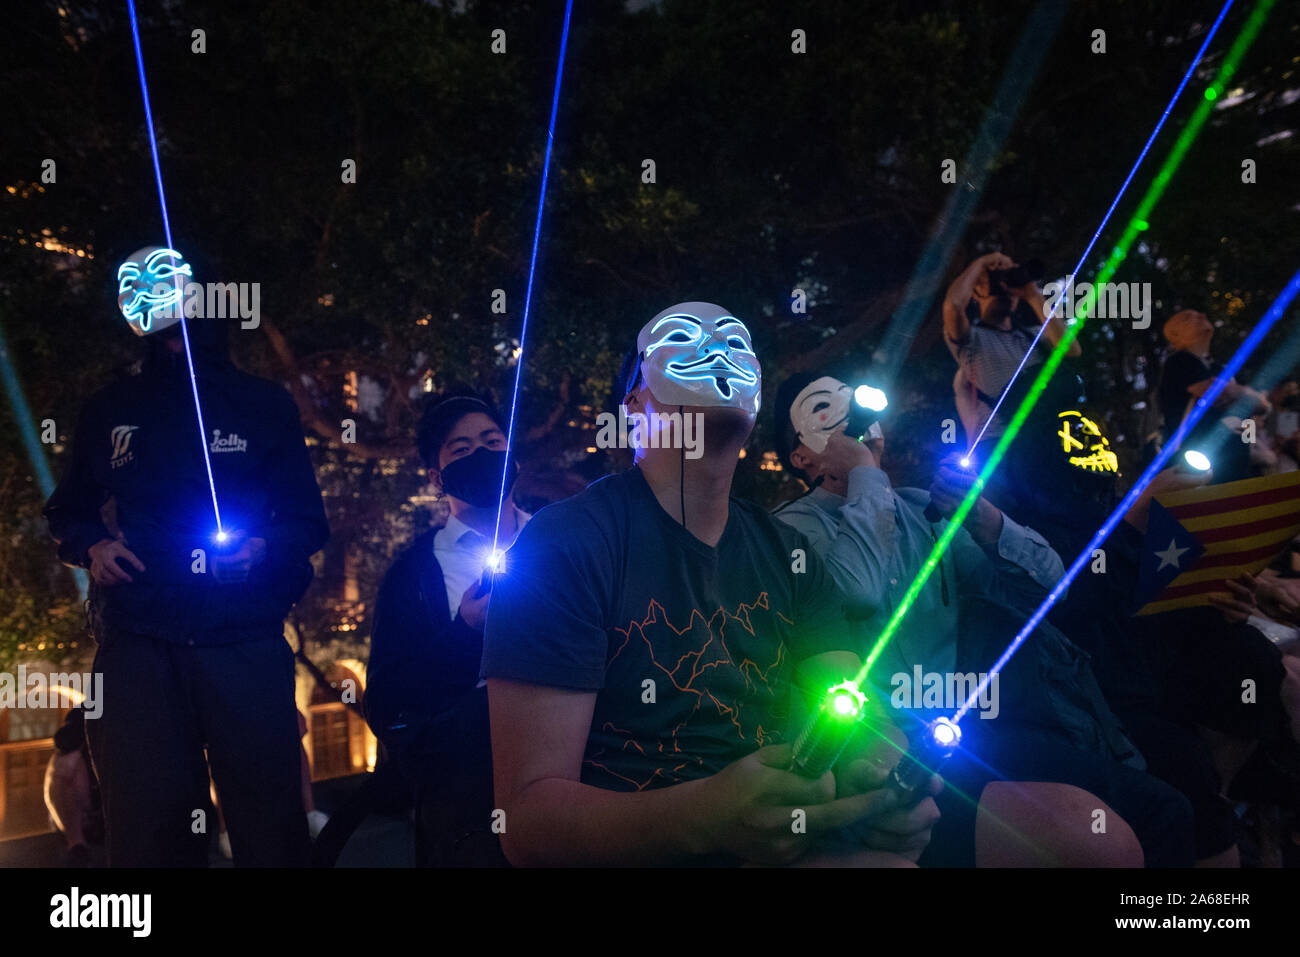 Protesters wearing masks use laser pointers as they take part during the Hong Kong Catalonia solidarity gathering at the Central district in Hong Kong. Stock Photo